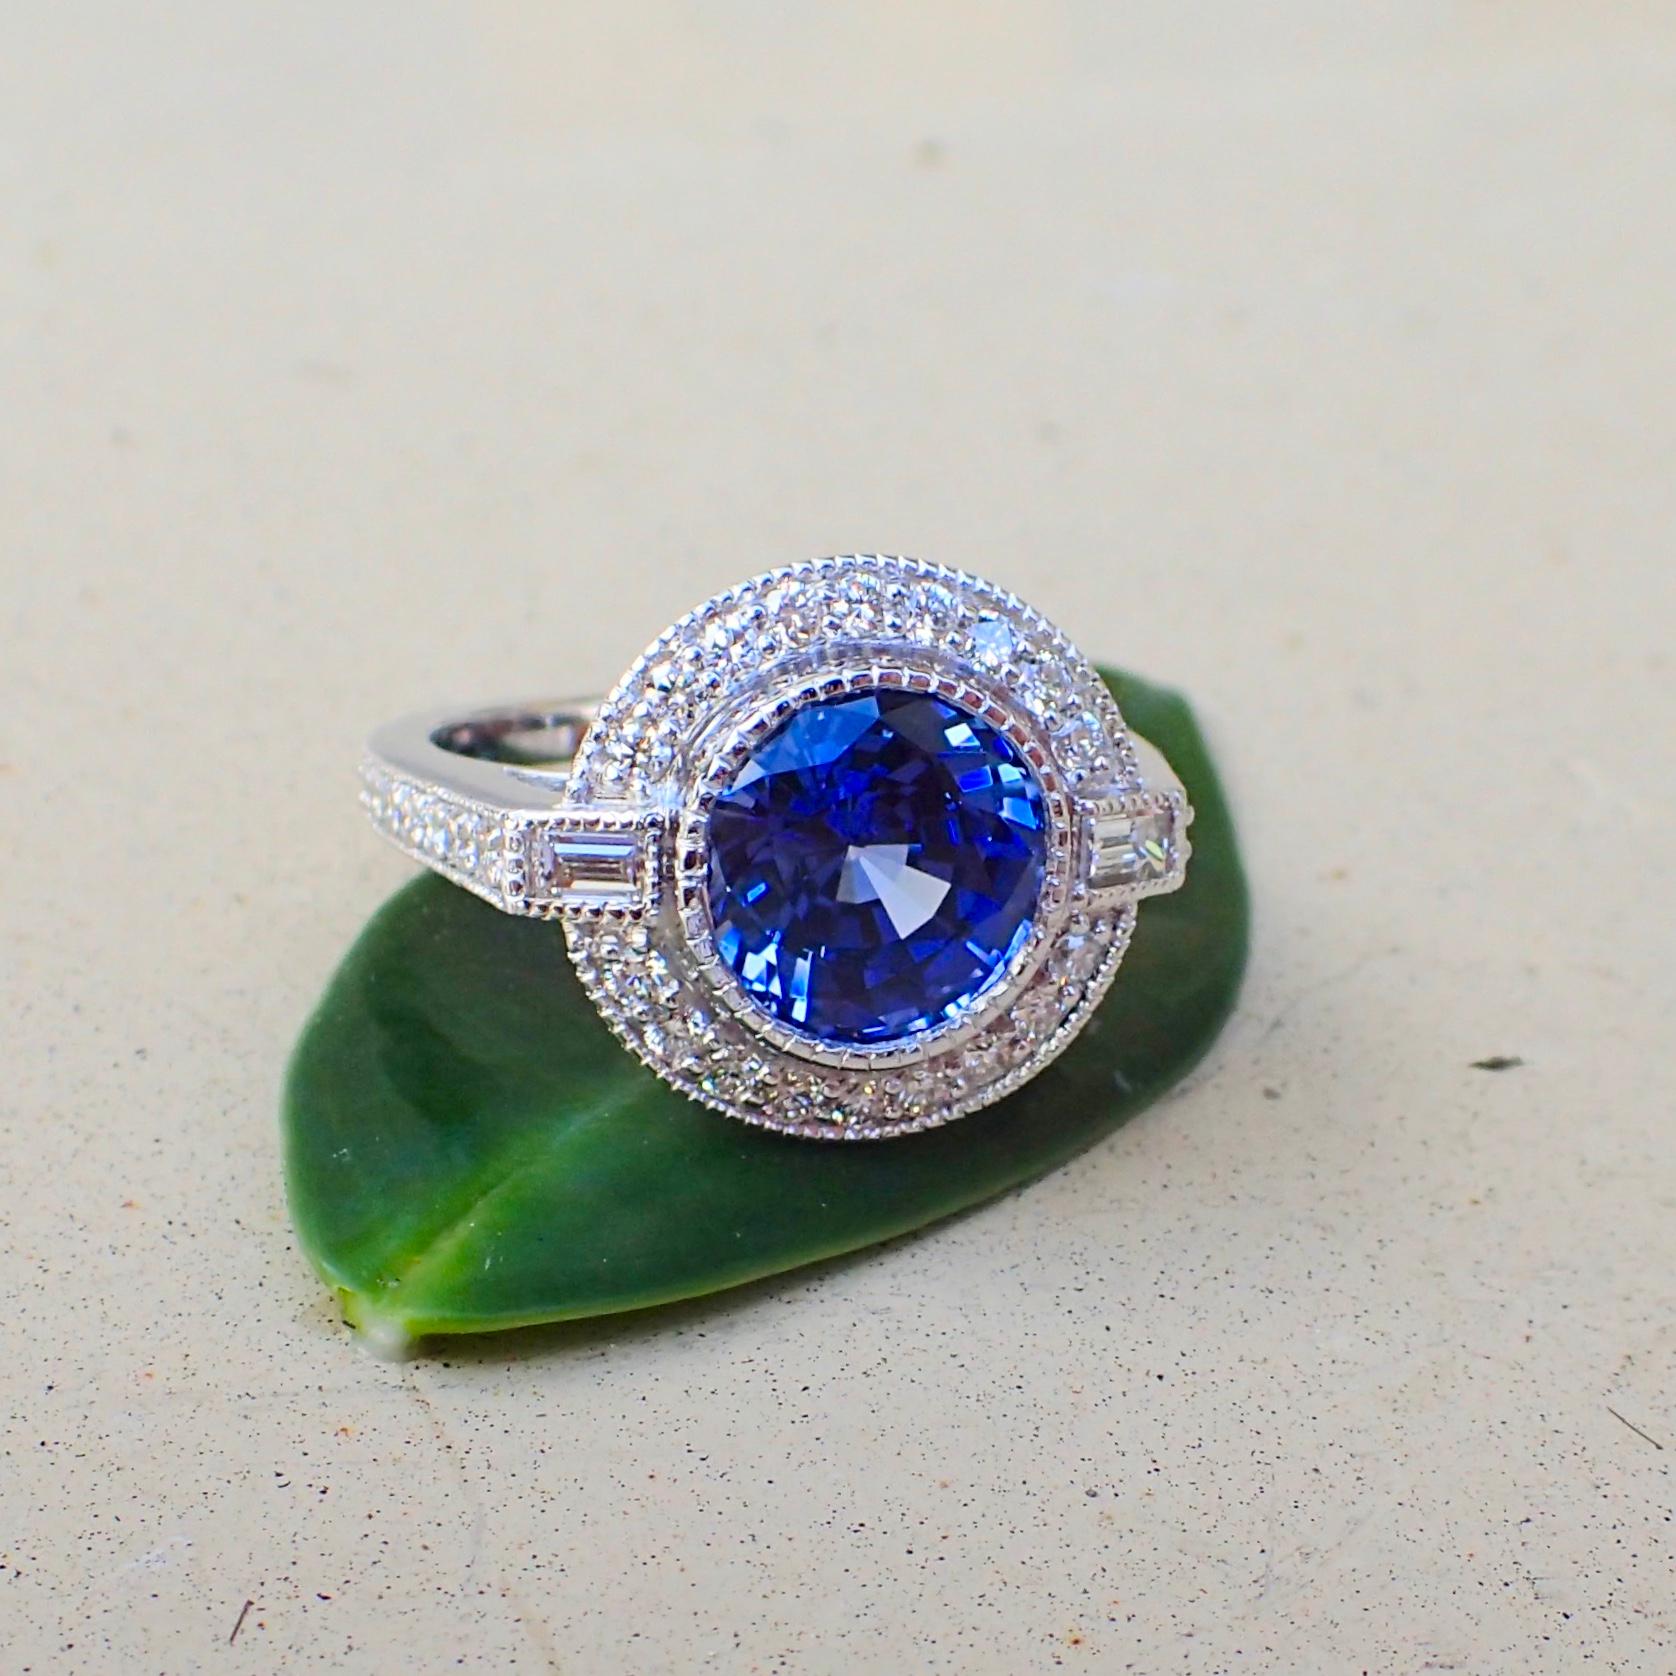 An 18k white gold ring is set with one (1) Round Brilliant Cut Chatham-Created Sapphire that measures 9mm x 9mm and weighs 3.93 carats with Clarity Grade VS-VVS and two (2) Baguette Cut Diamonds that measure 2.9mm x 1.9mm and 2.9mm x 1.9mm and weigh